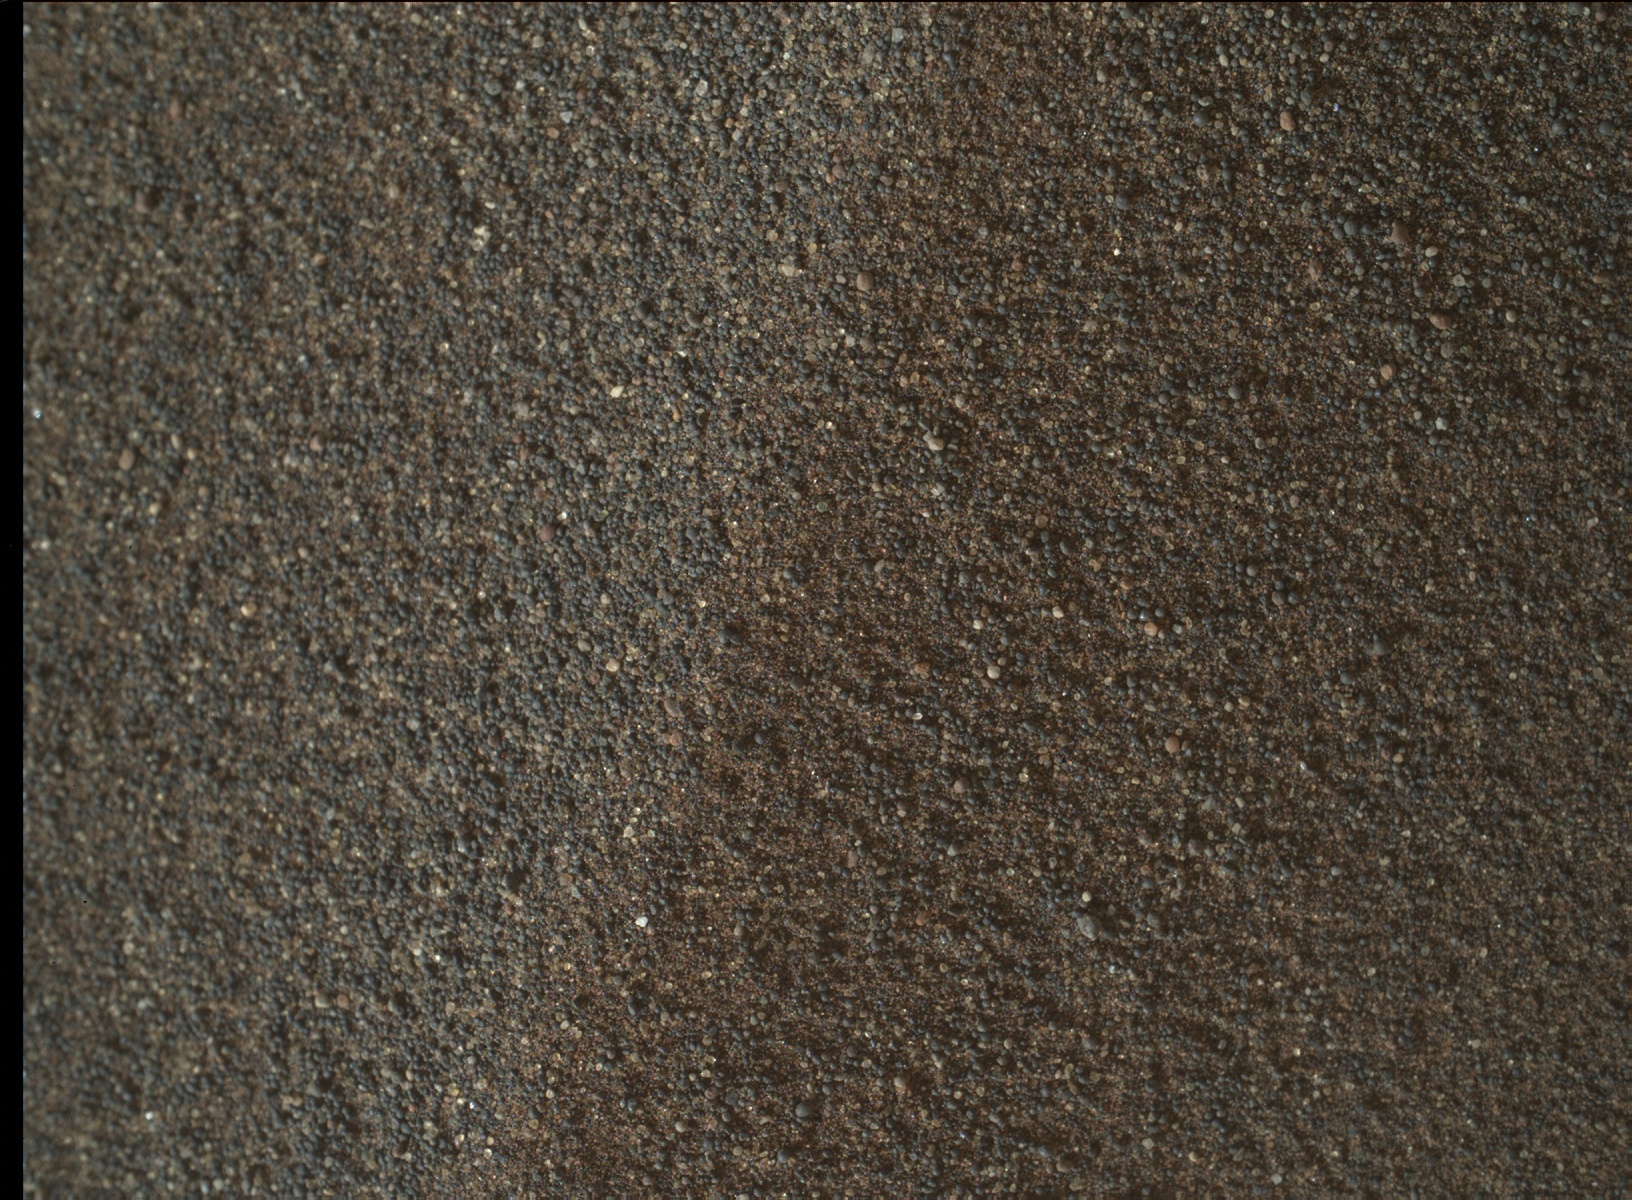 Nasa's Mars rover Curiosity acquired this image using its Mars Hand Lens Imager (MAHLI) on Sol 2994